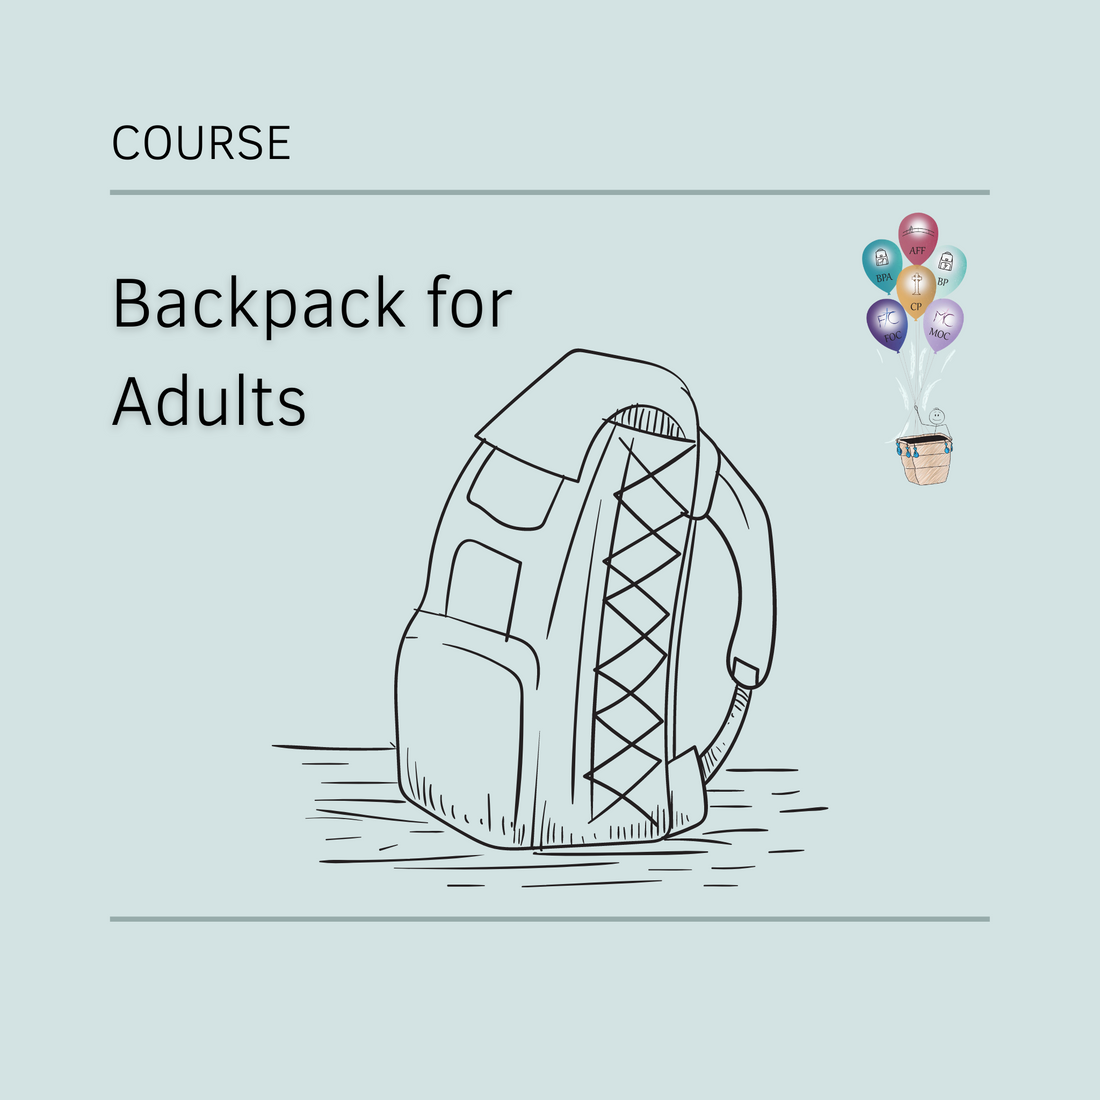 Backpack for Adults